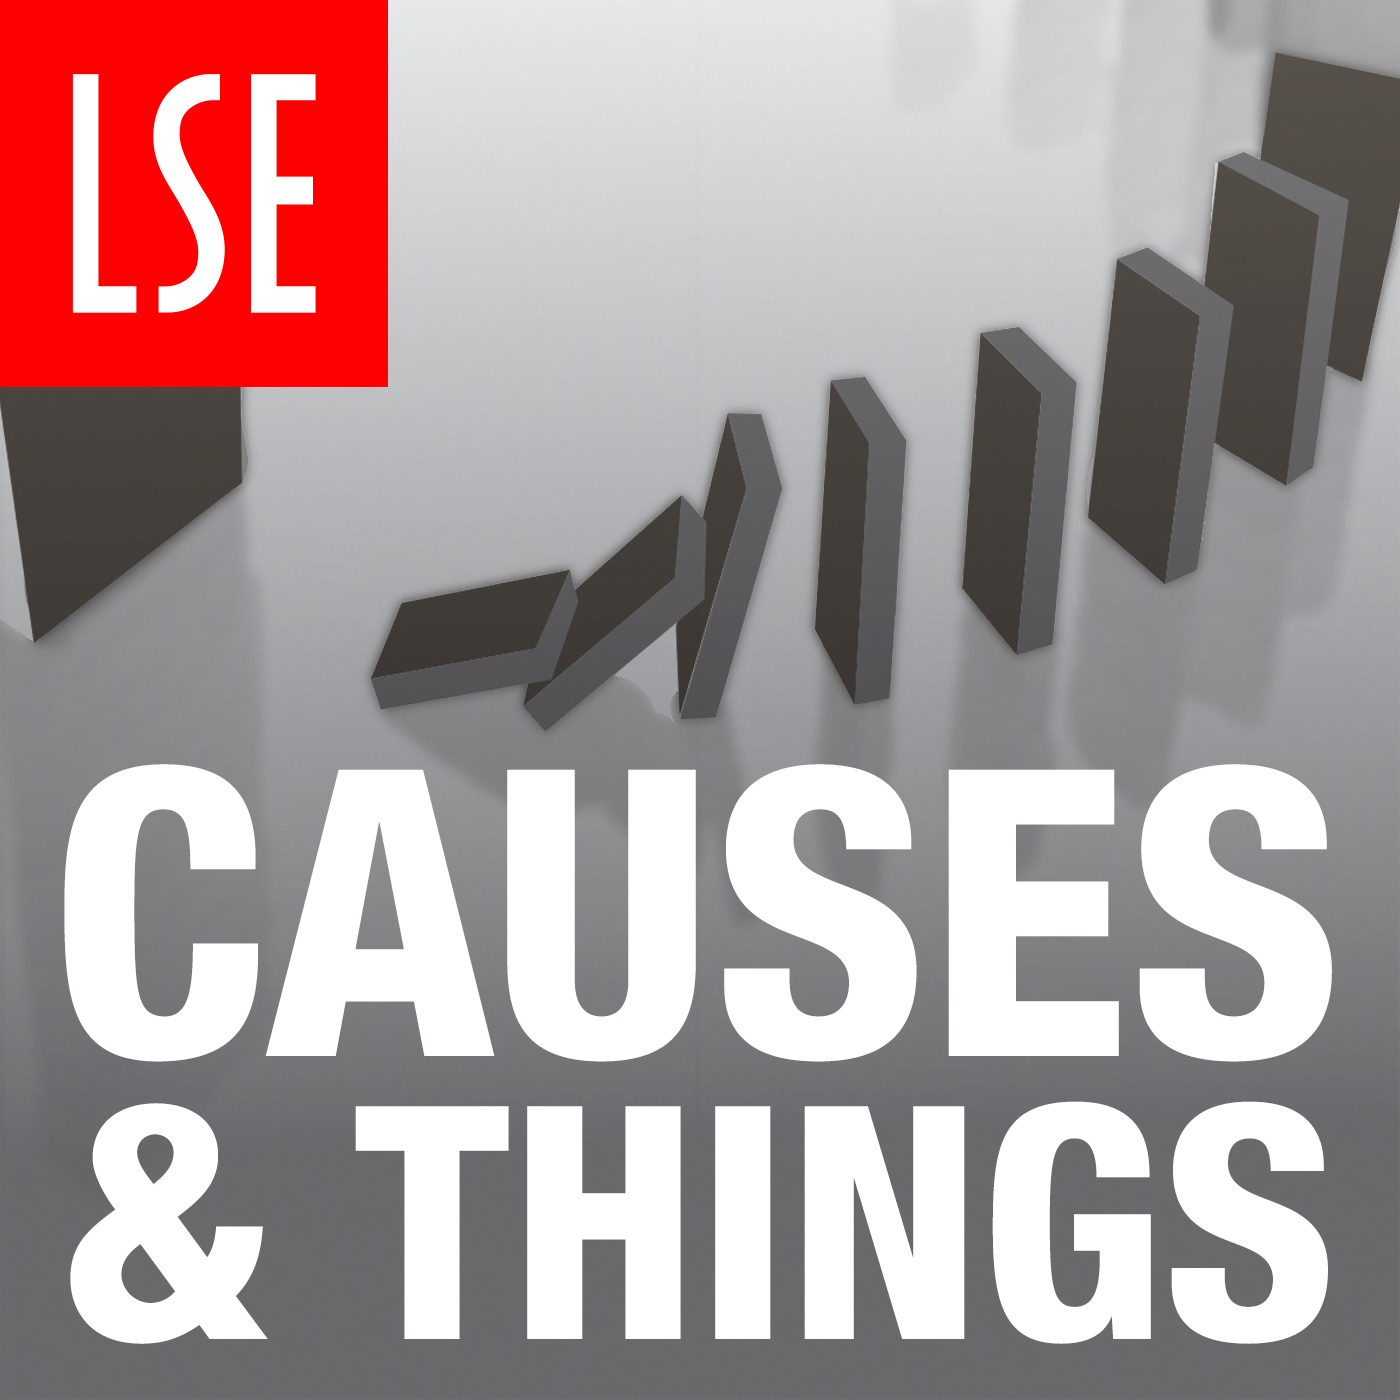 Causes and Things